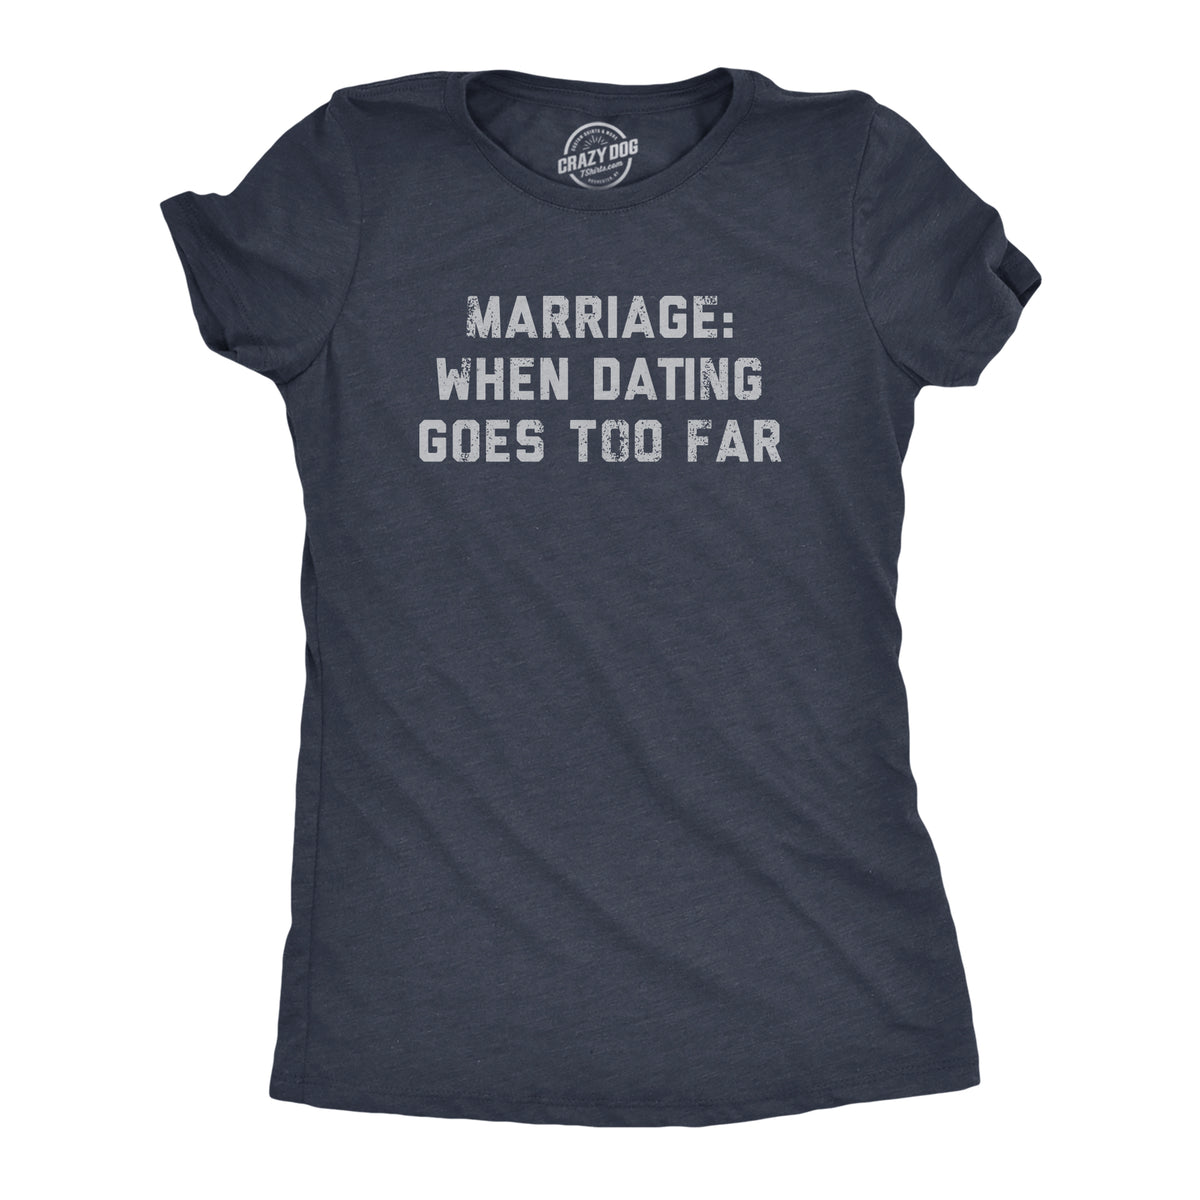 Funny Heather Navy - MARRIAGE Marriage When Dating Goes Too Far Womens T Shirt Nerdy Sarcastic Tee